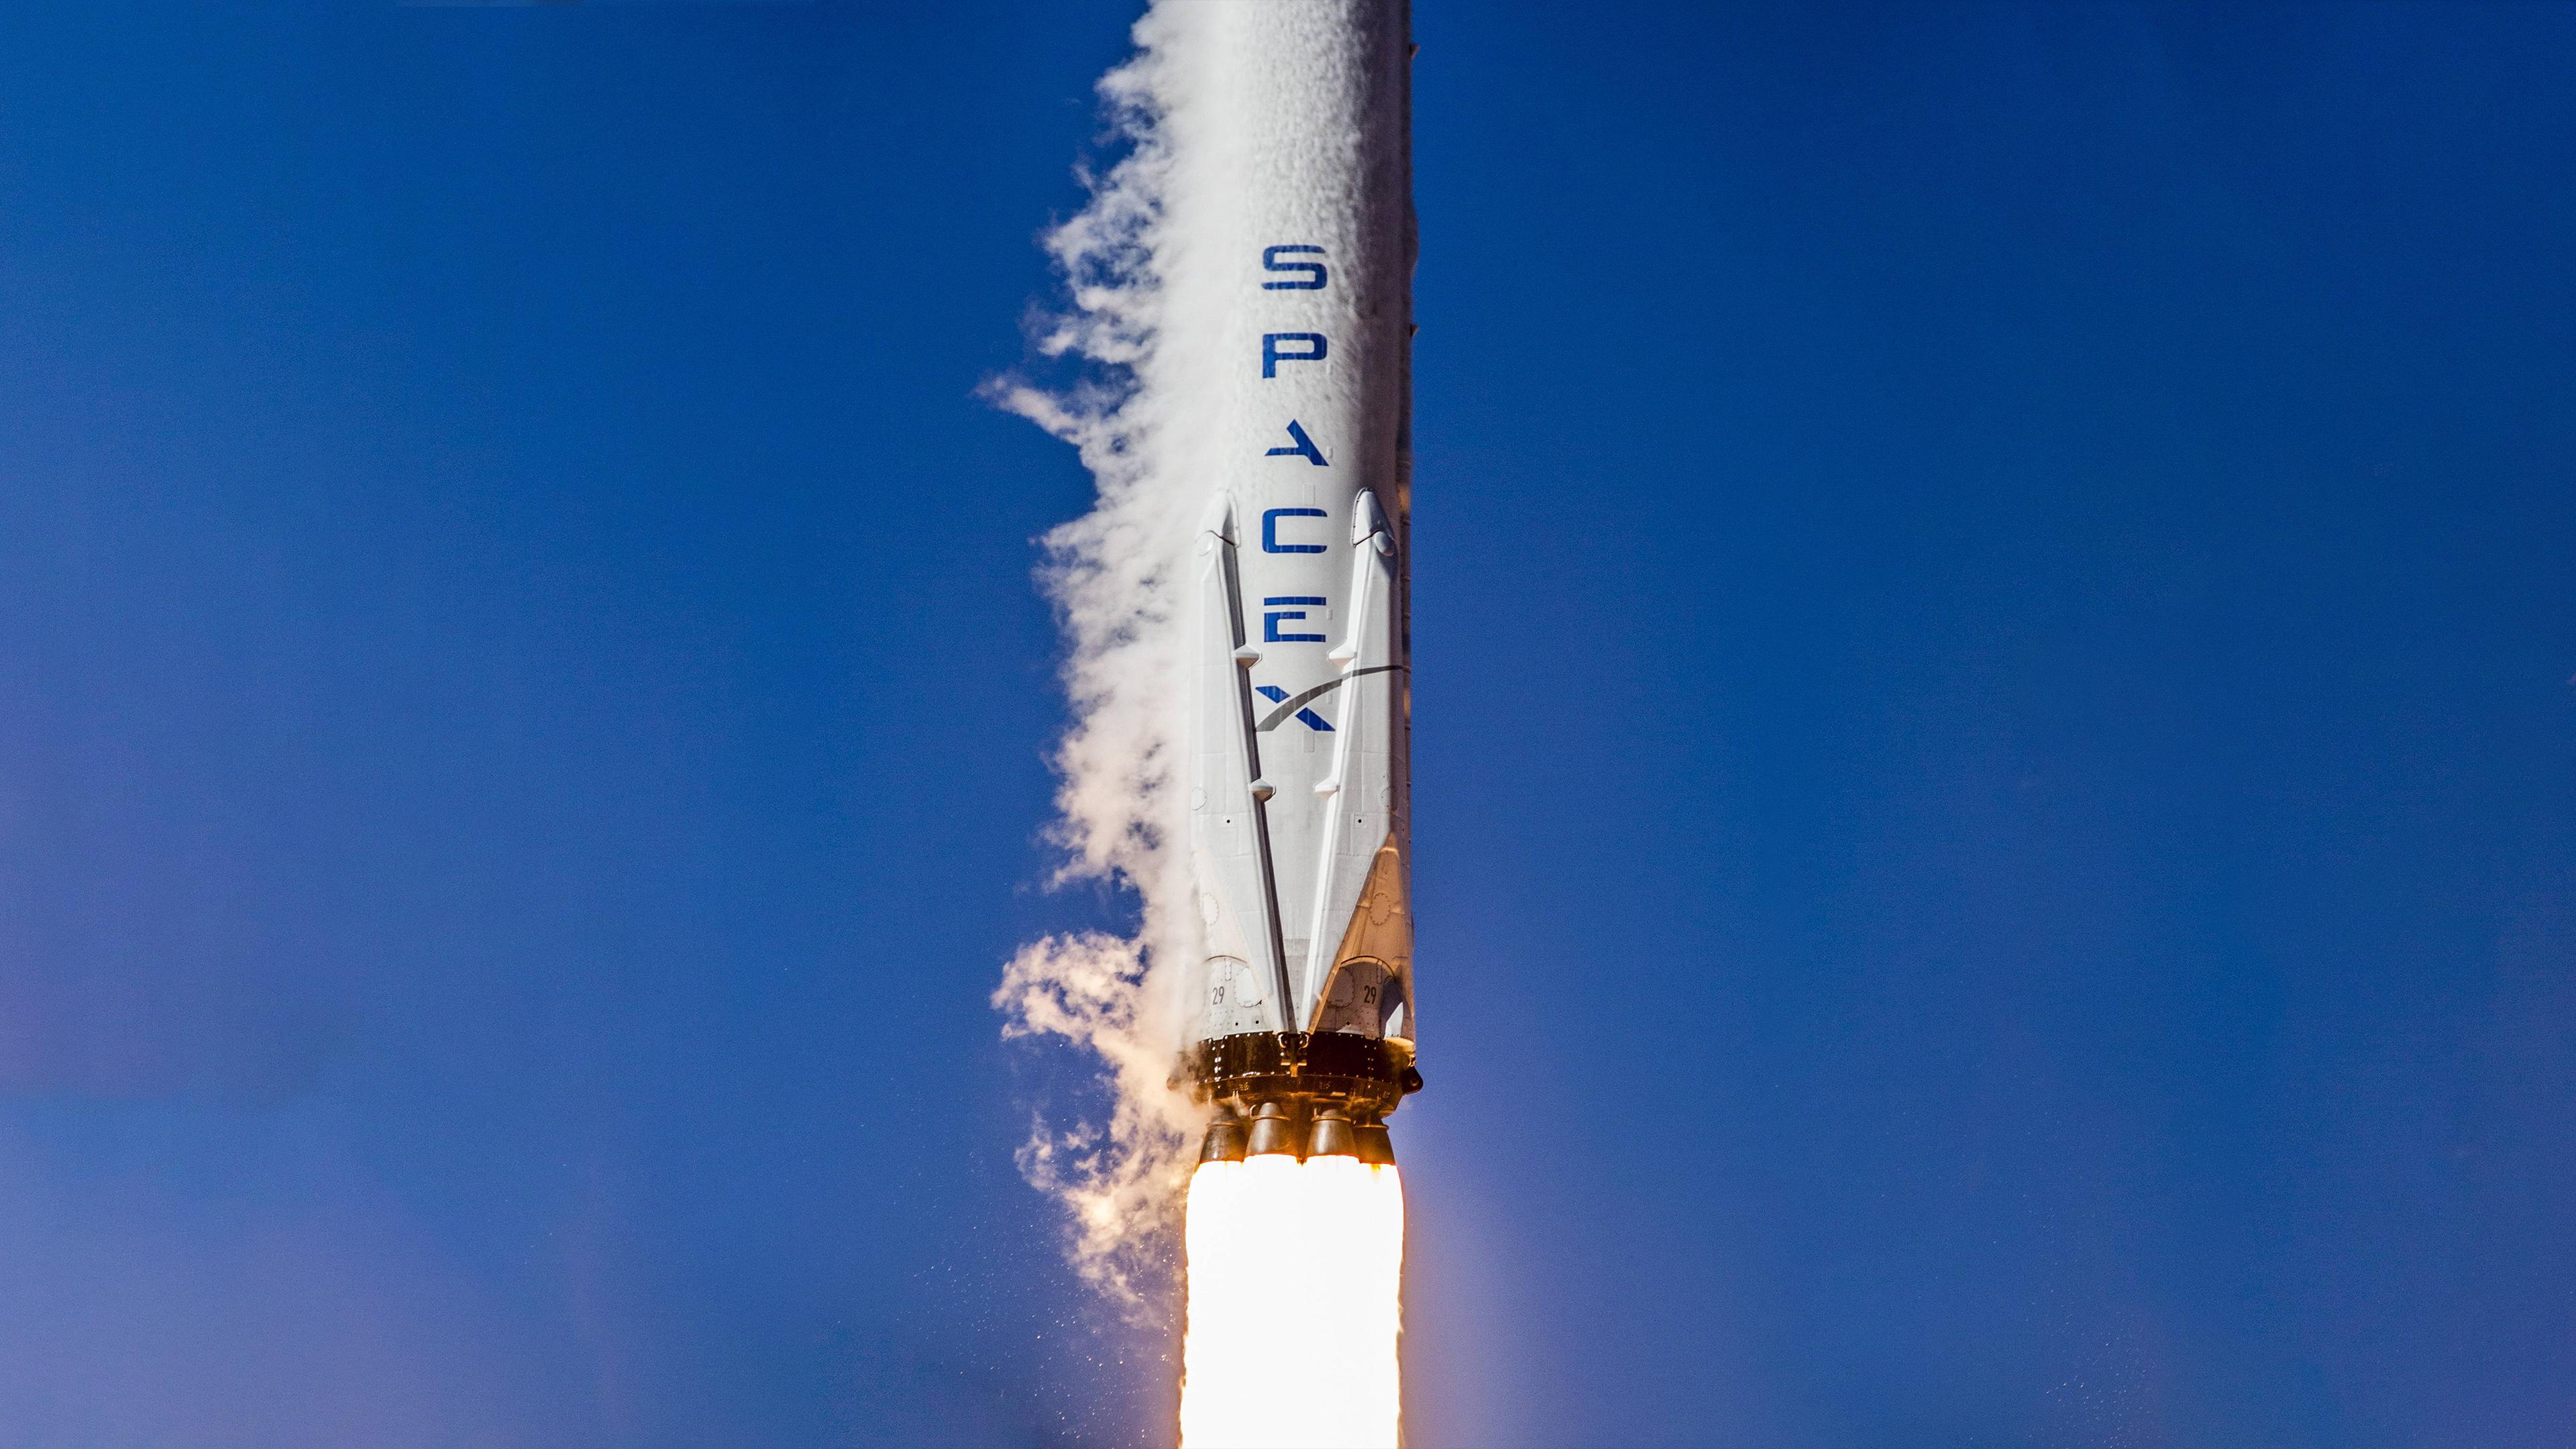 Made A 4K Wallpaper From SpaceX Iridium 1 Launch